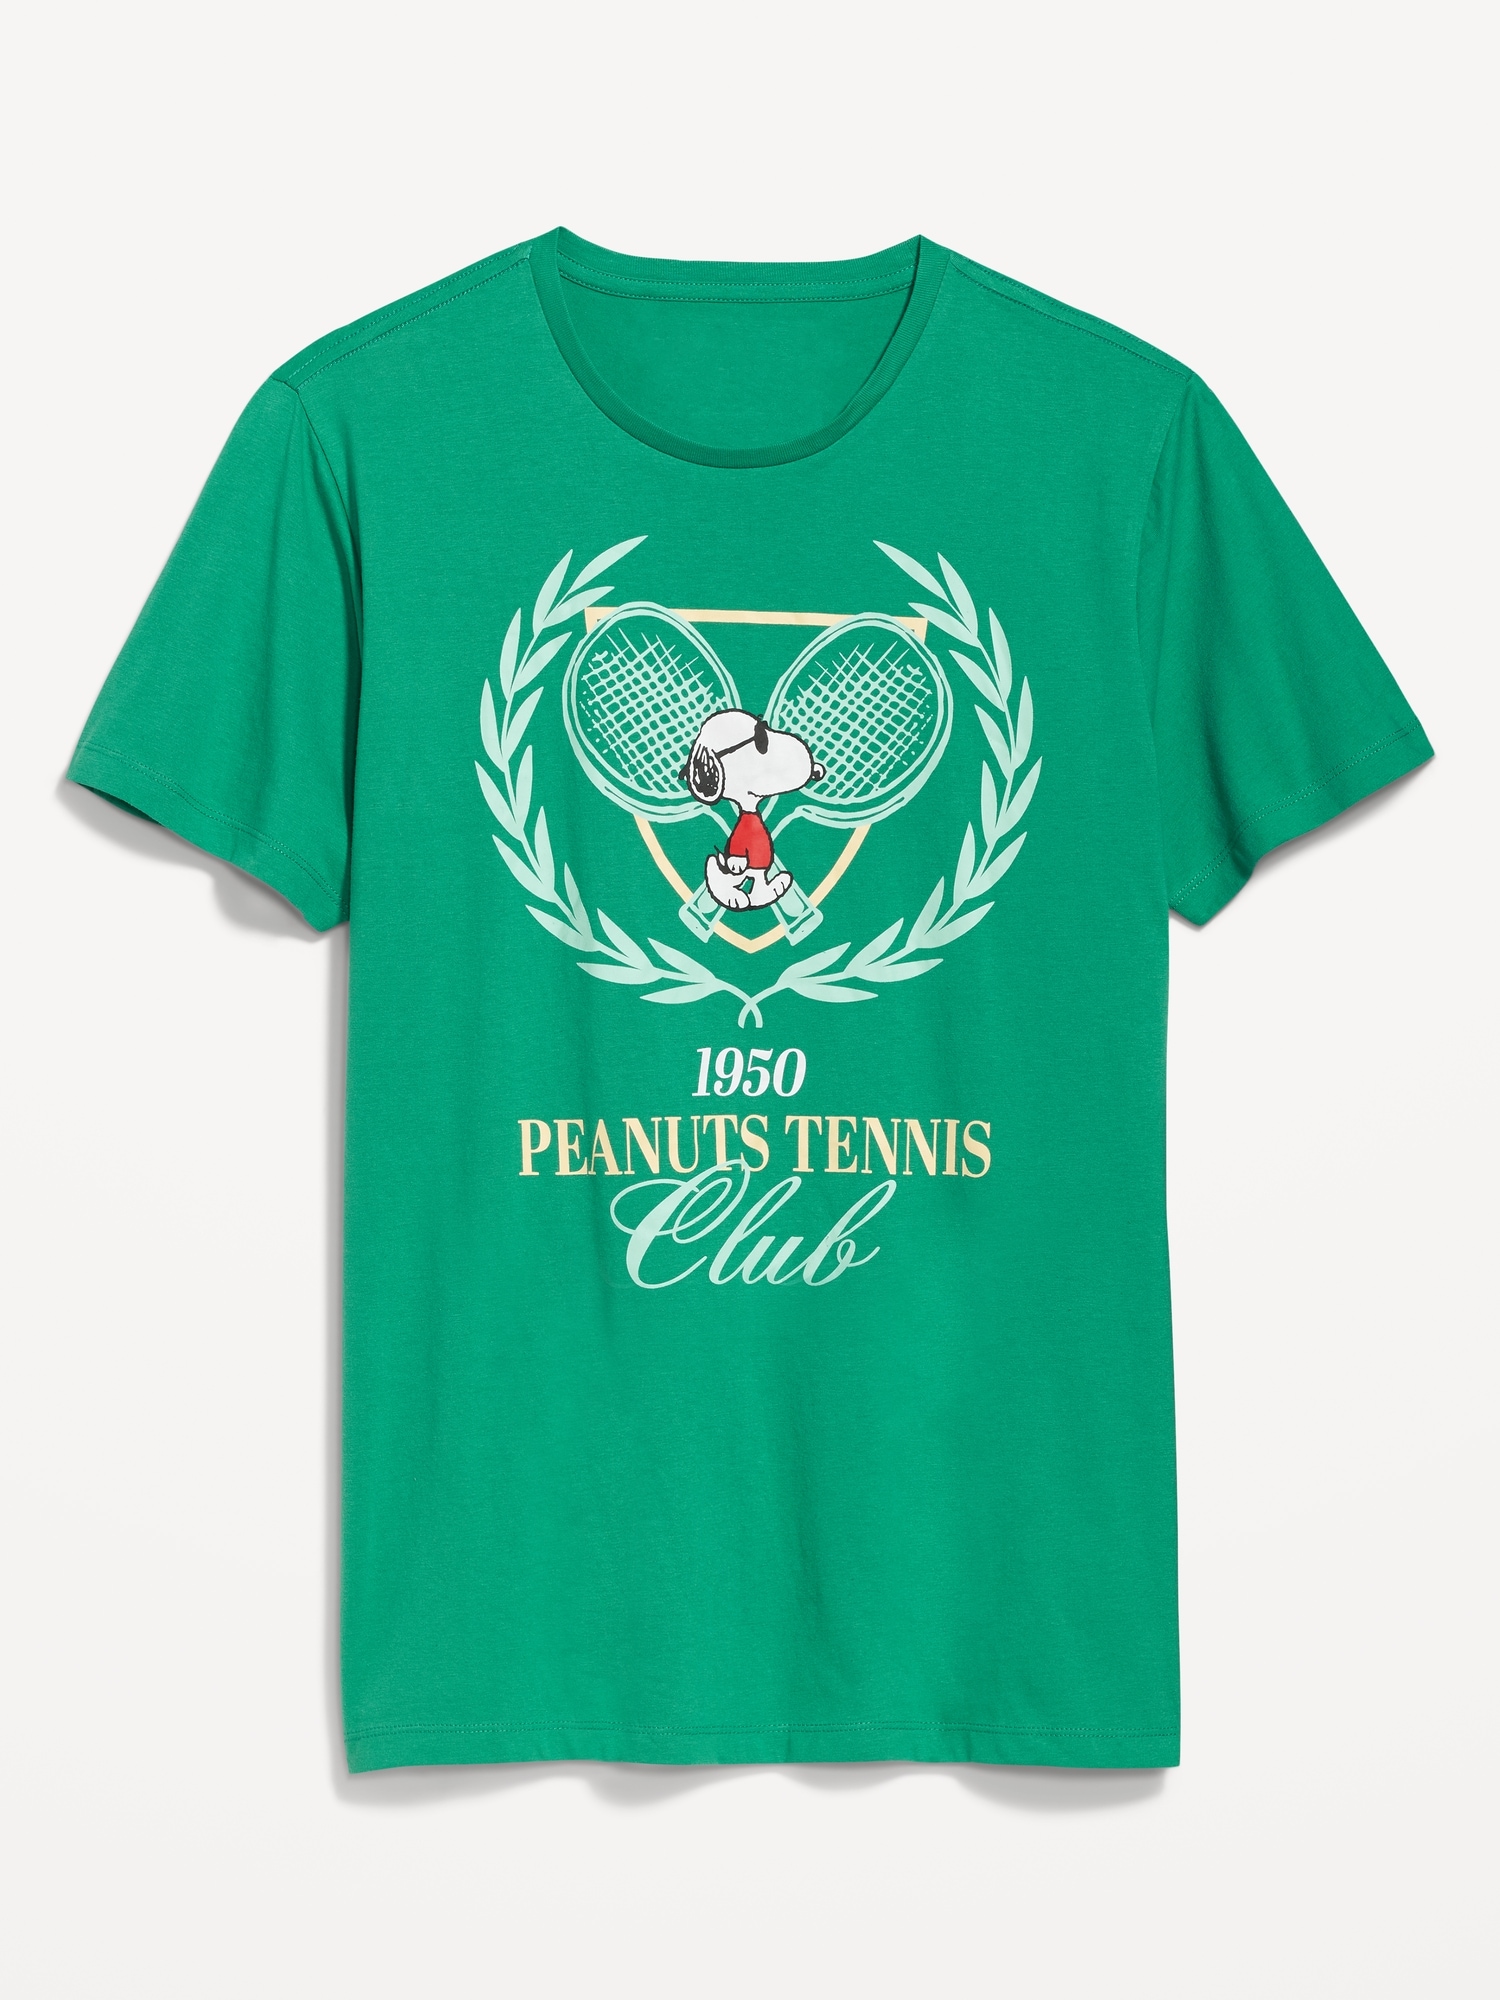 Old Navy Peanuts® Snoopy "1950 Peanuts Tennis Club" Gender-Neutral T-Shirt for Adults green. 1